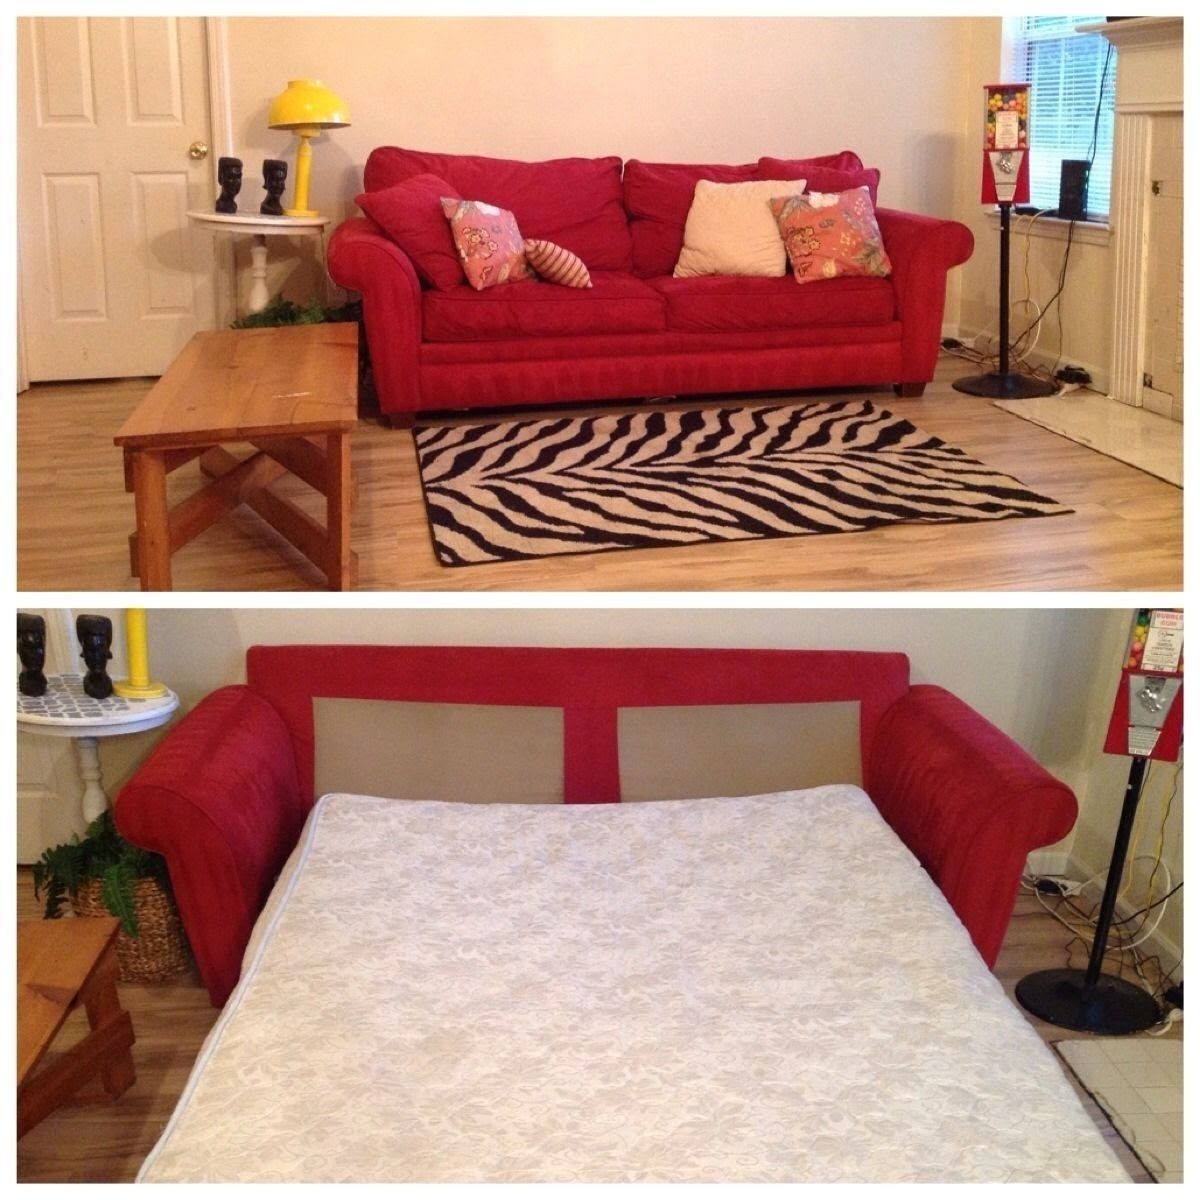 Bright Red Harvetys Sleeper Sofa Couch – Youtube For Red Sleeper Sofas (View 6 of 10)